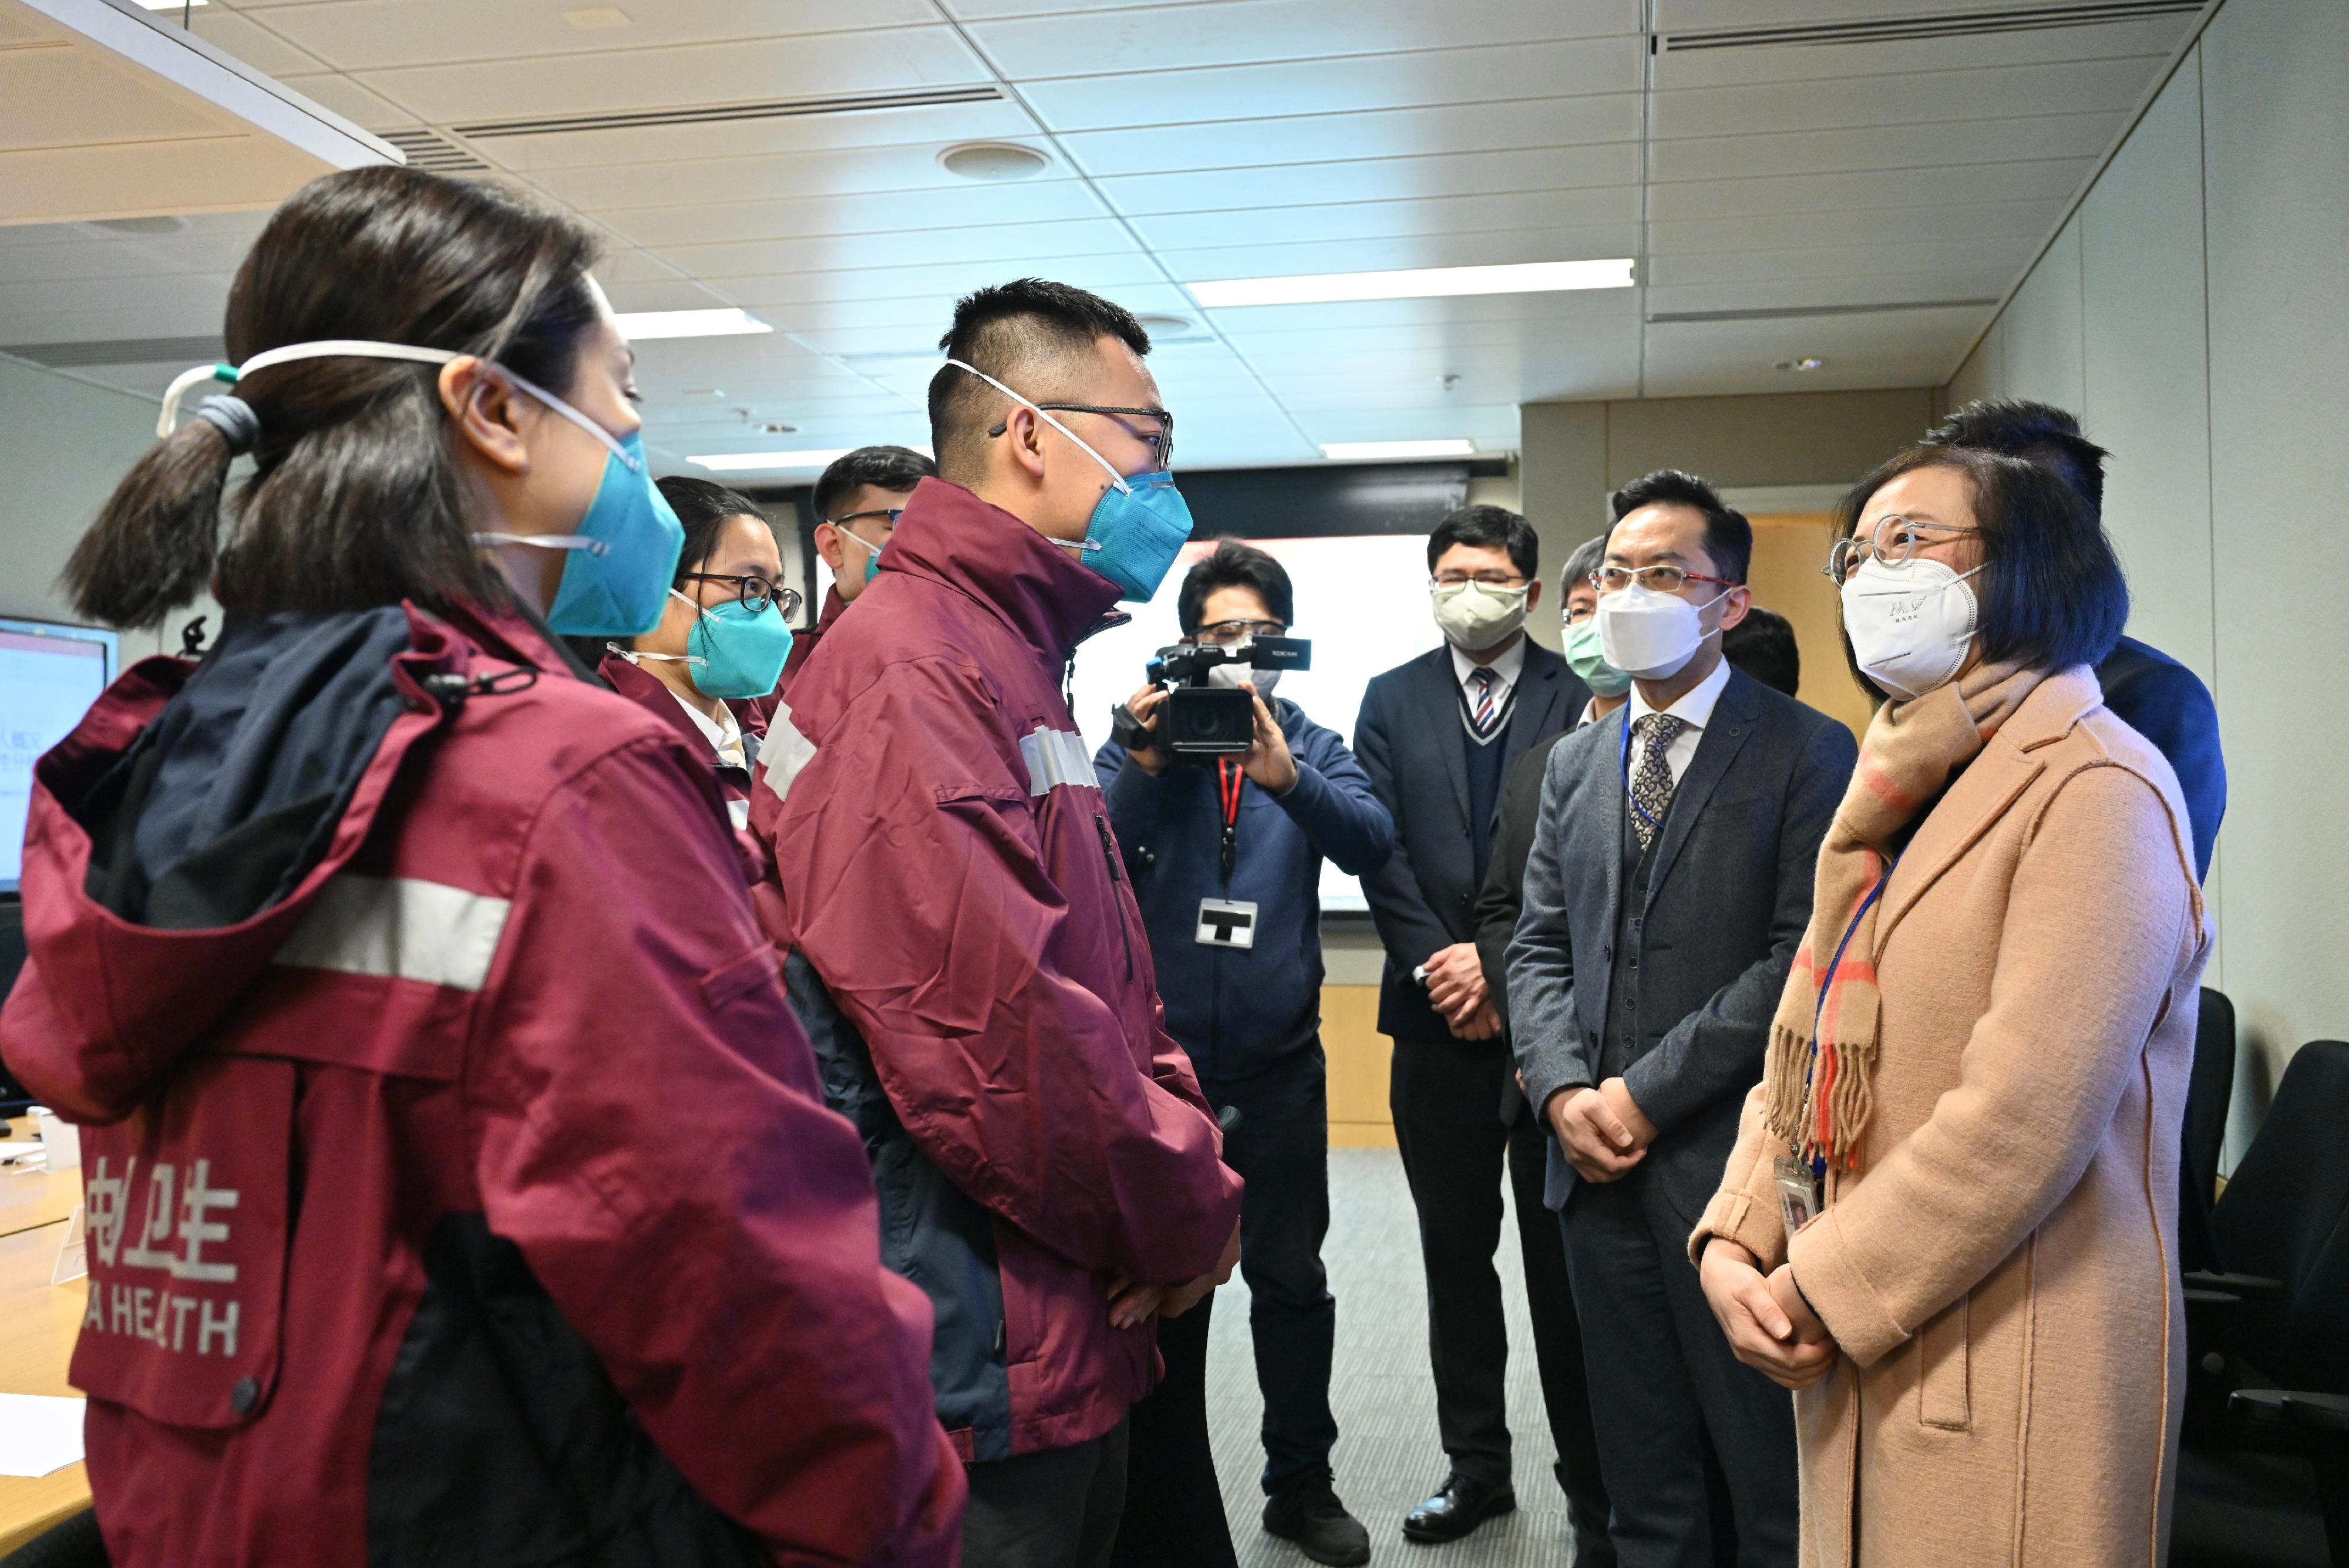 The task force of epidemiologists led by the Secretary for Food and Health, Professor Sophia Chan, held a meeting at the Central Government Offices this morning (February 18). Photo shows Professor Chan (front, first right) chatting with the Director of Institute of Infectious Disease Control and Prevention of the Guangdong Provincial Center for Disease Control and Prevention, Mr Kang Min (front, second left). Professor Chan welcomes the four epidemiological experts from the Mainland to visit Hong Kong.